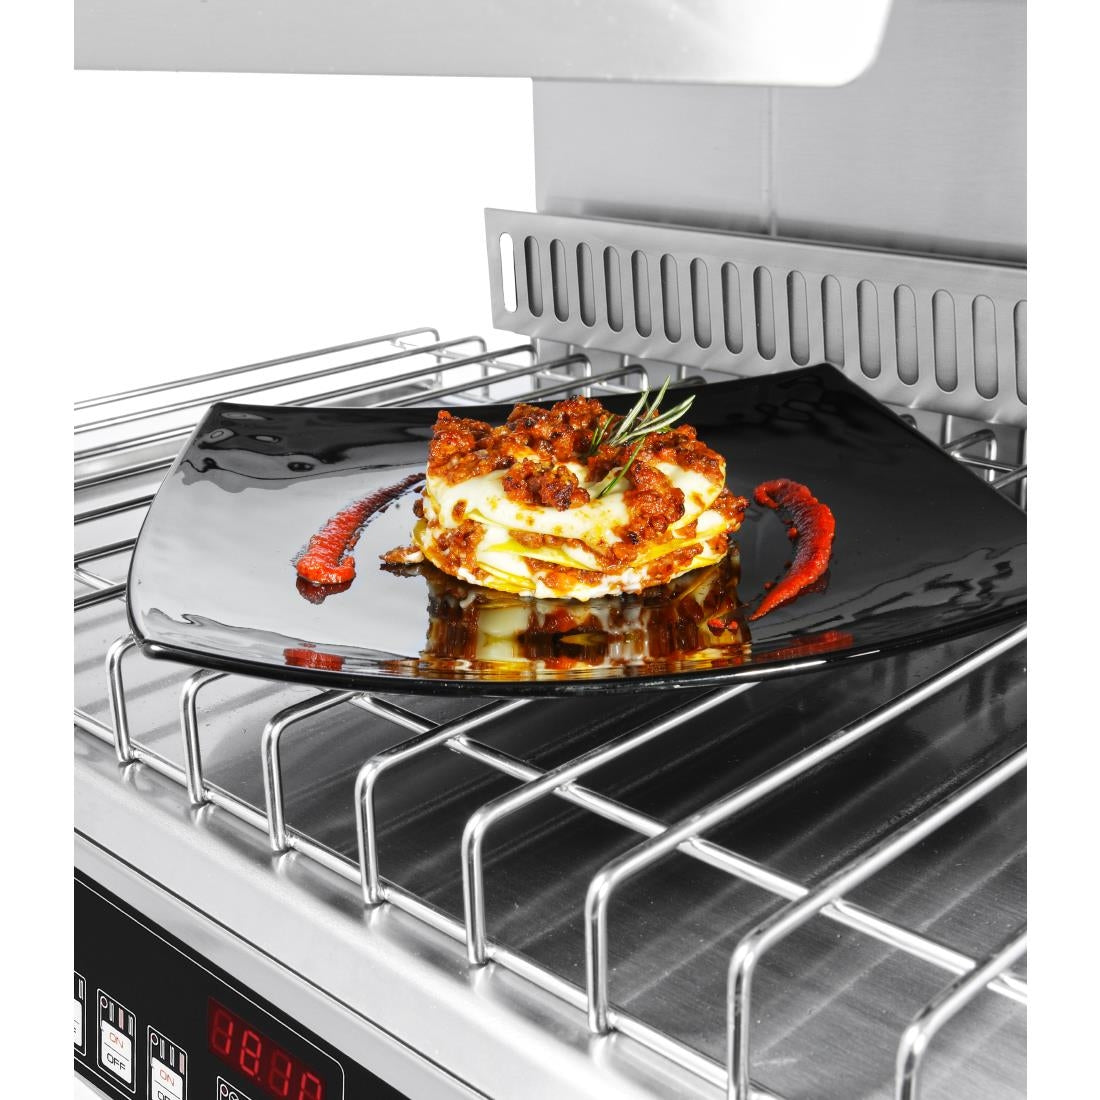 FW876 Giorik Hi Lite Rise and Fall Electric Salamander Grill Three PhaseSH30 JD Catering Equipment Solutions Ltd